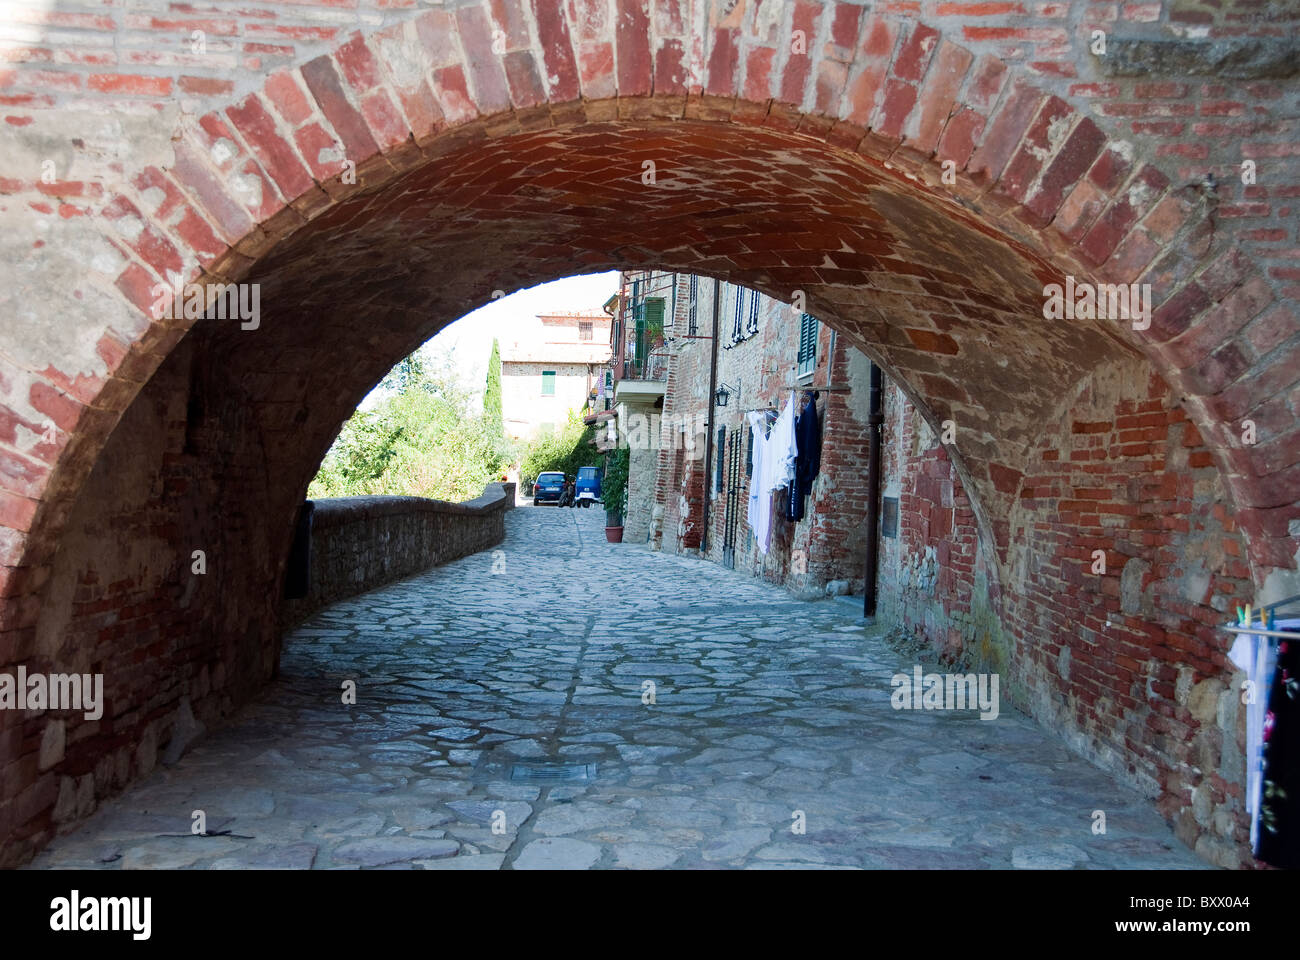 Archway in the wall of the fortified town of Ficulle in Umbria, Italy Stock Photo